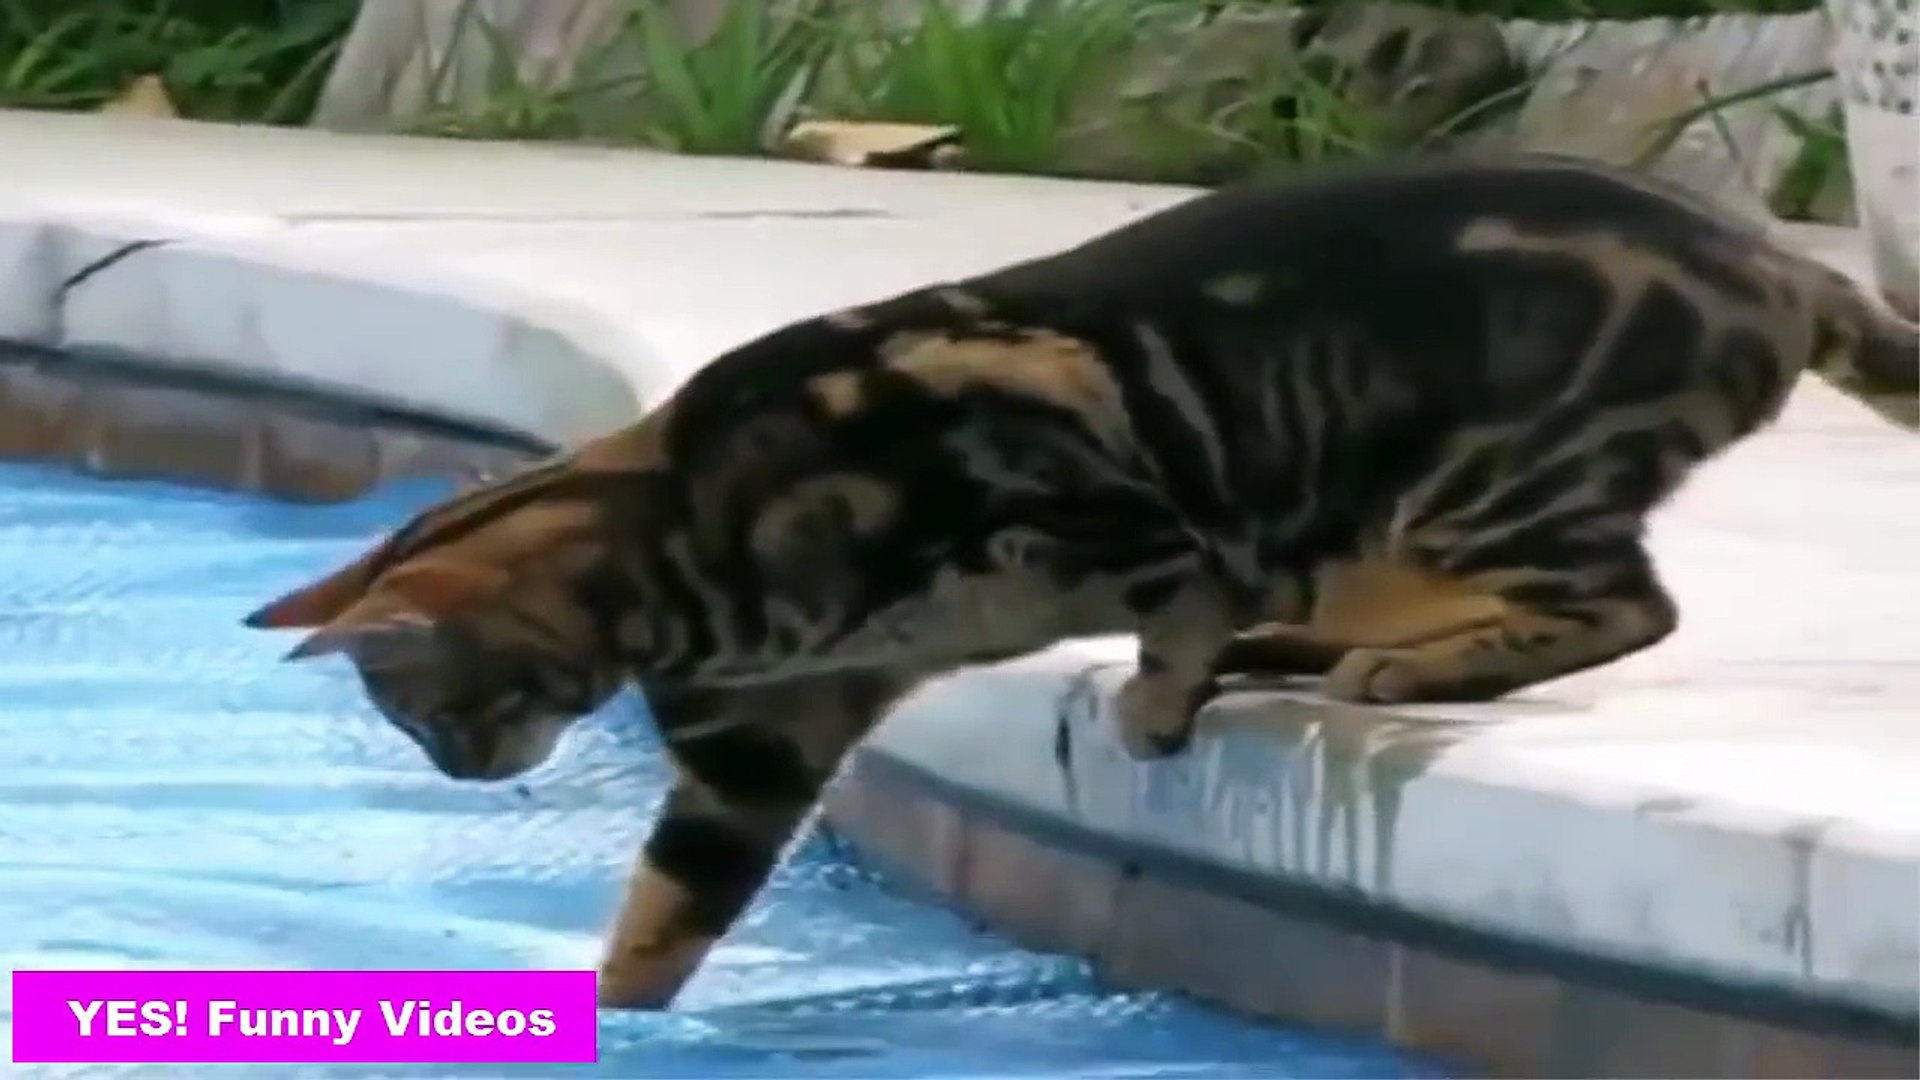 Startled Cats Compilation - Dailymotion Video